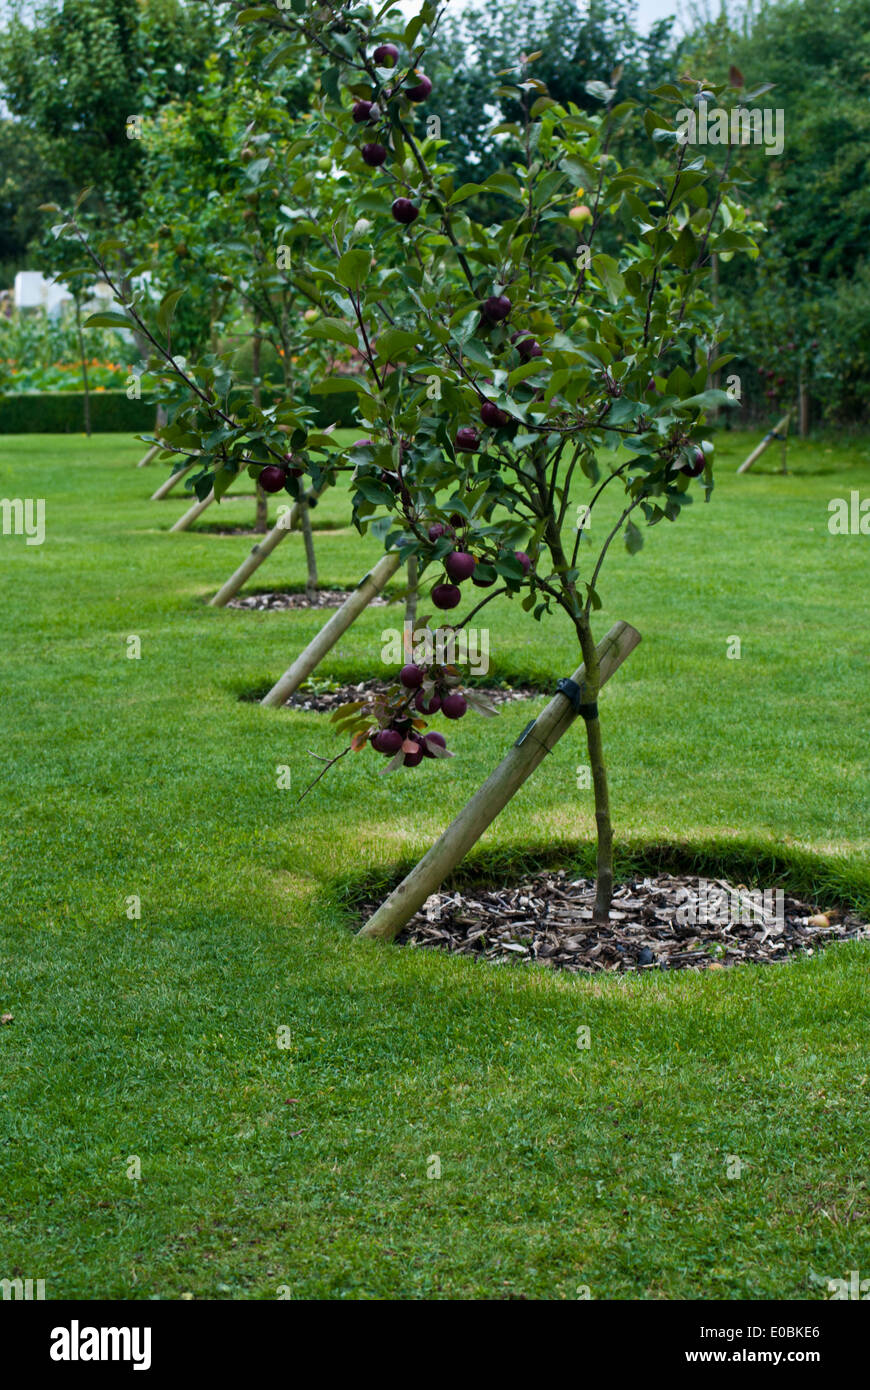 Maturing apple trees, the trunks being supported by wooden stakes Stock Photo